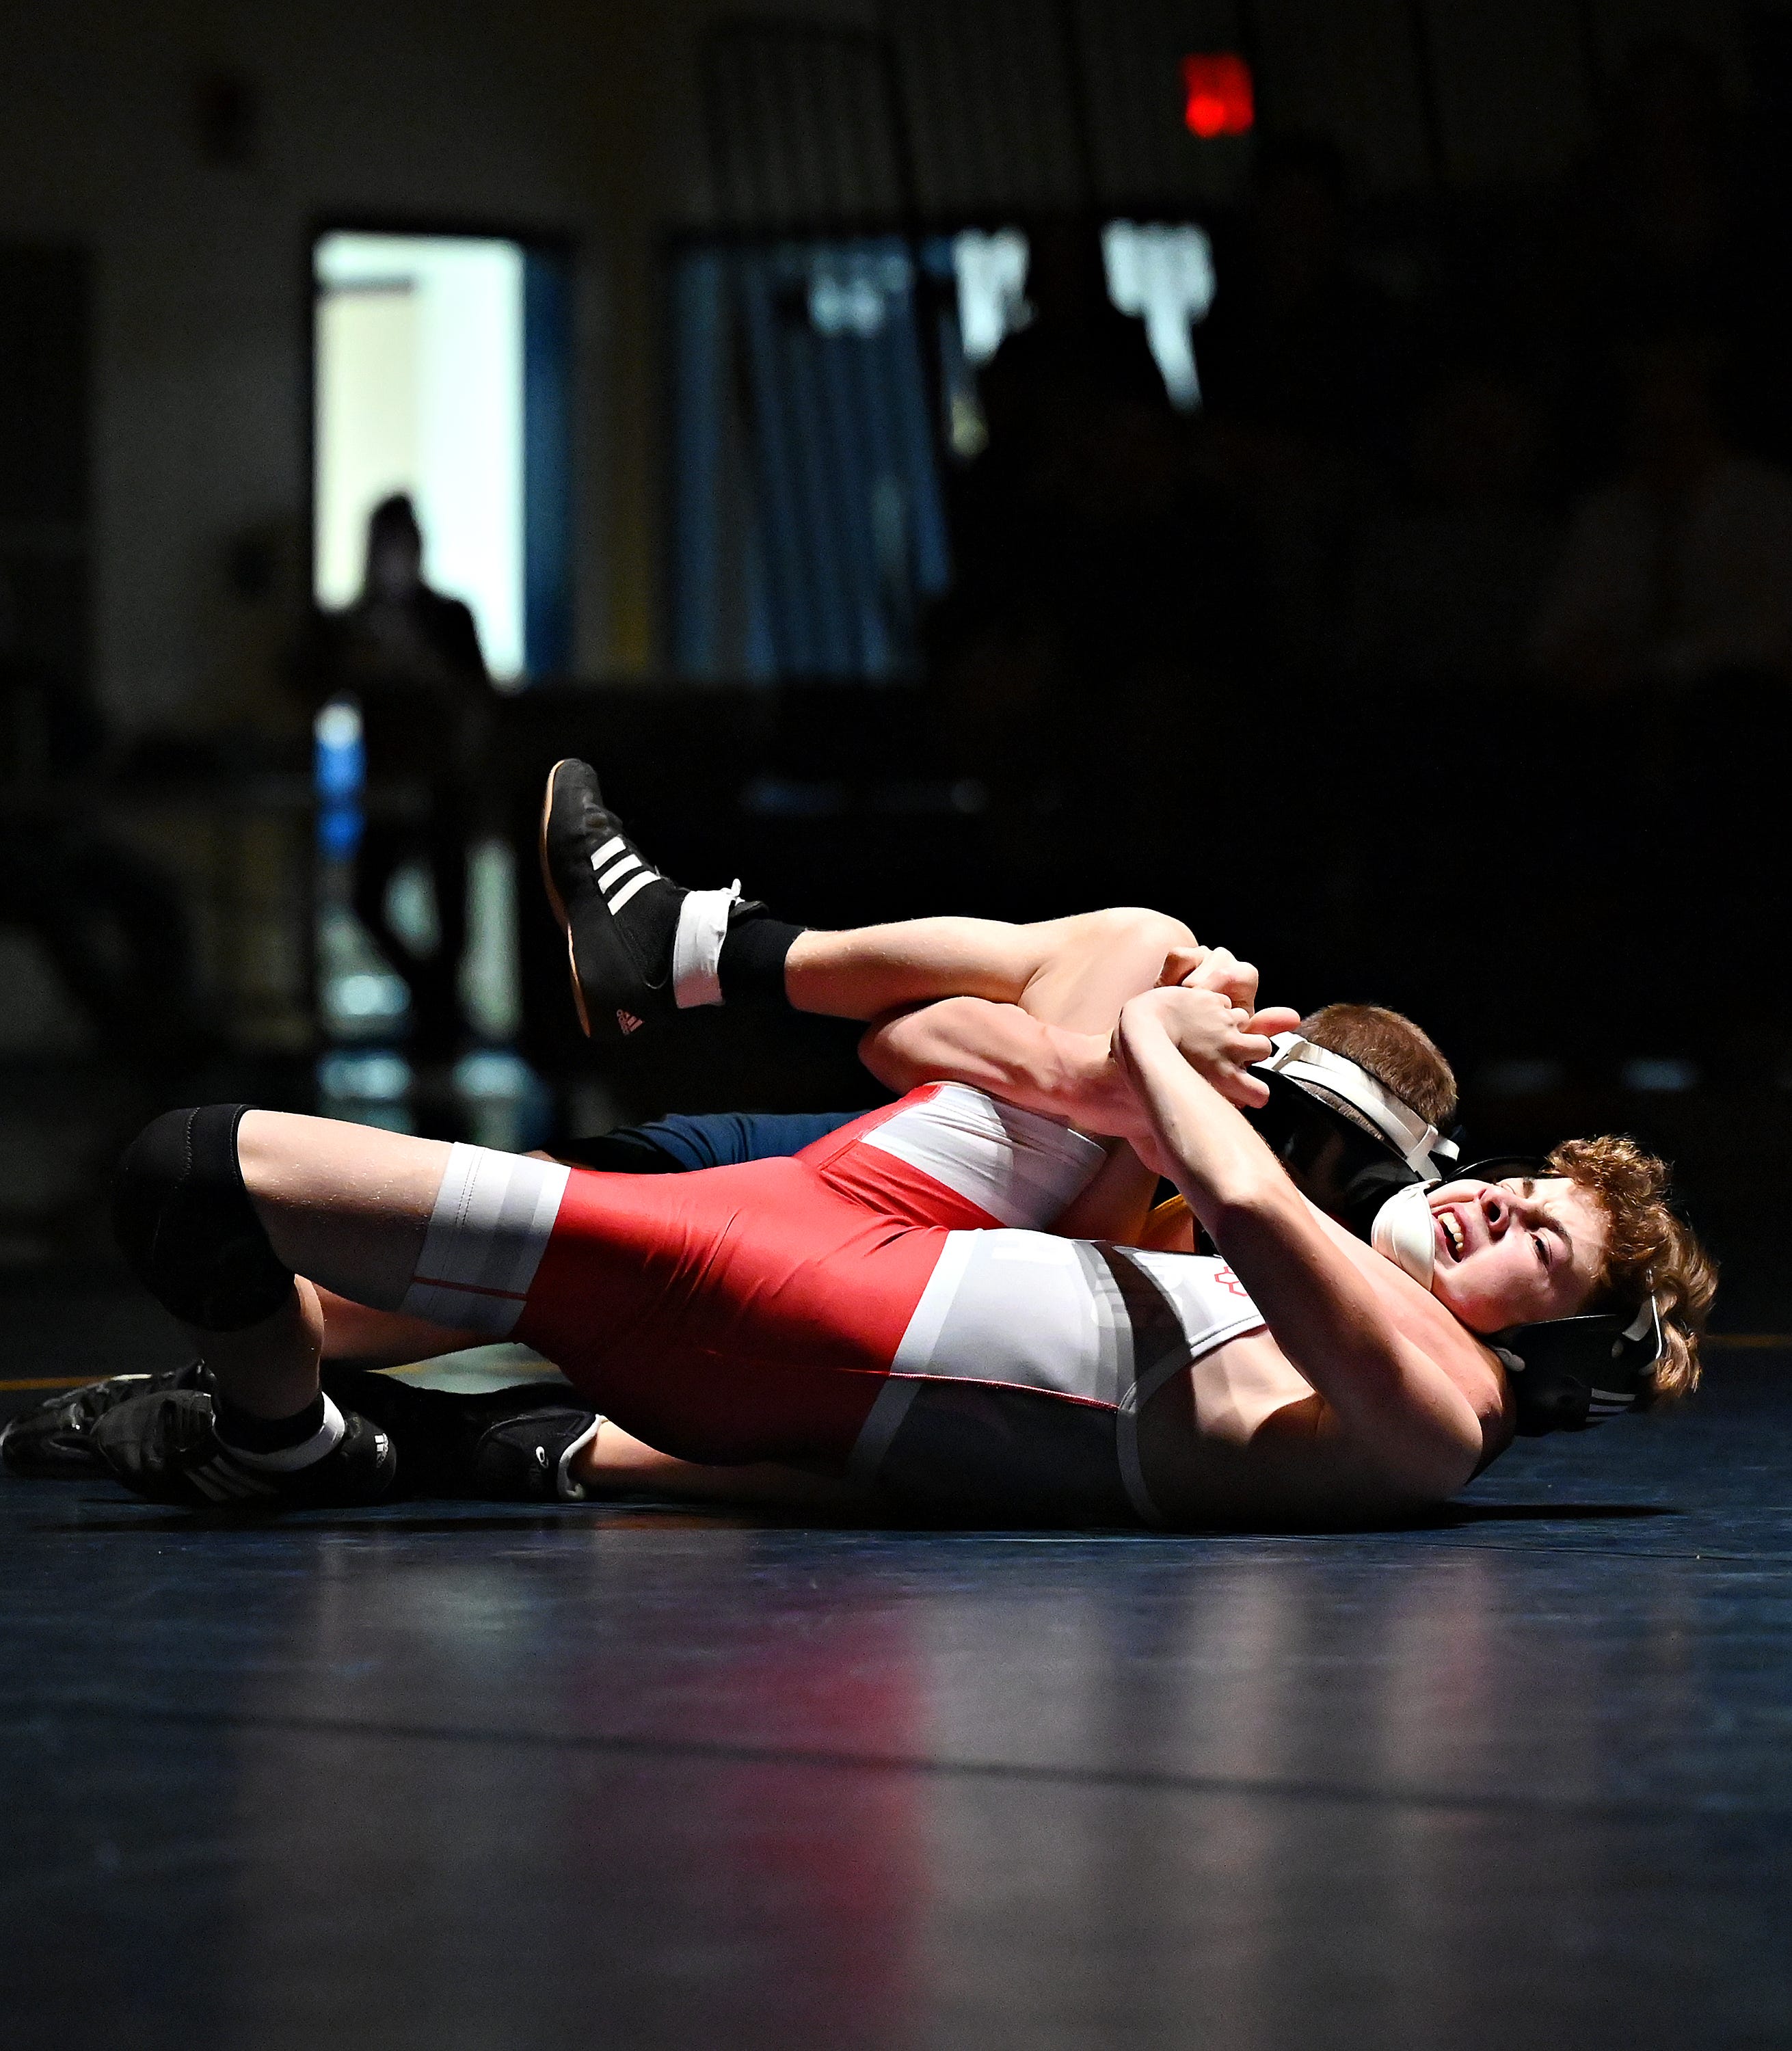 Eastern York’s Isaac Garner, back, and Hamburg’s Chase Denatala compete in the 114-pound weight class during PIAA District 3, Class 2-A first round wrestling action at Eastern York High School in Lower Windsor Township, Monday, Jan. 30, 2023. Garner would win with a pin at 1:30 and Eastern York would win the meet 50-22. Dawn J. Sagert photo